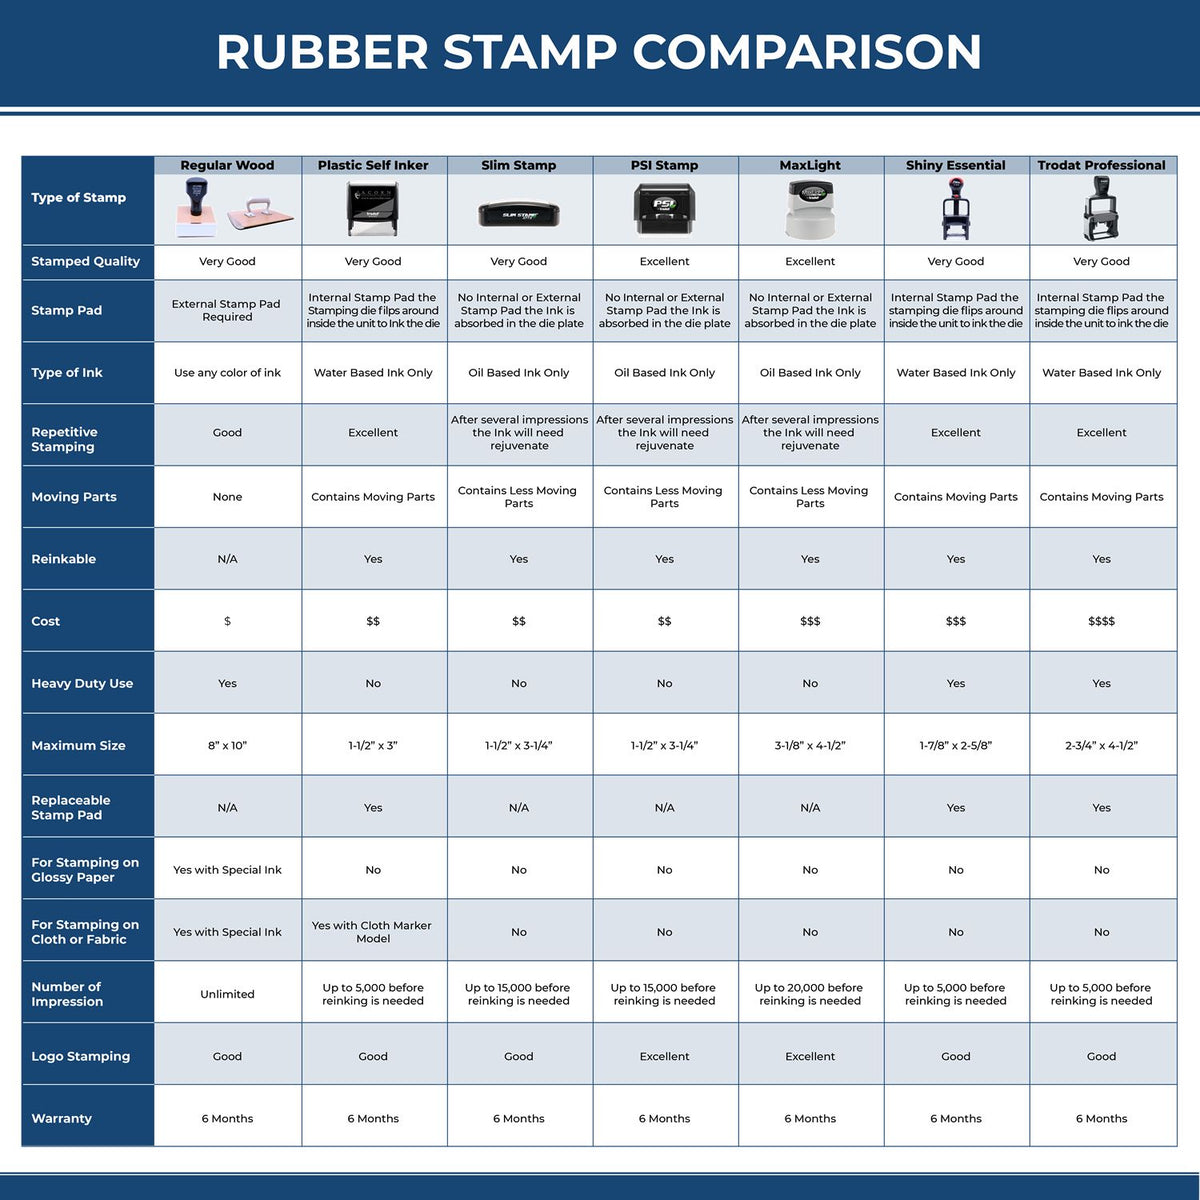 Large Medical Personnel Only Rubber Stamp 5503R Rubber Stamp Comparison